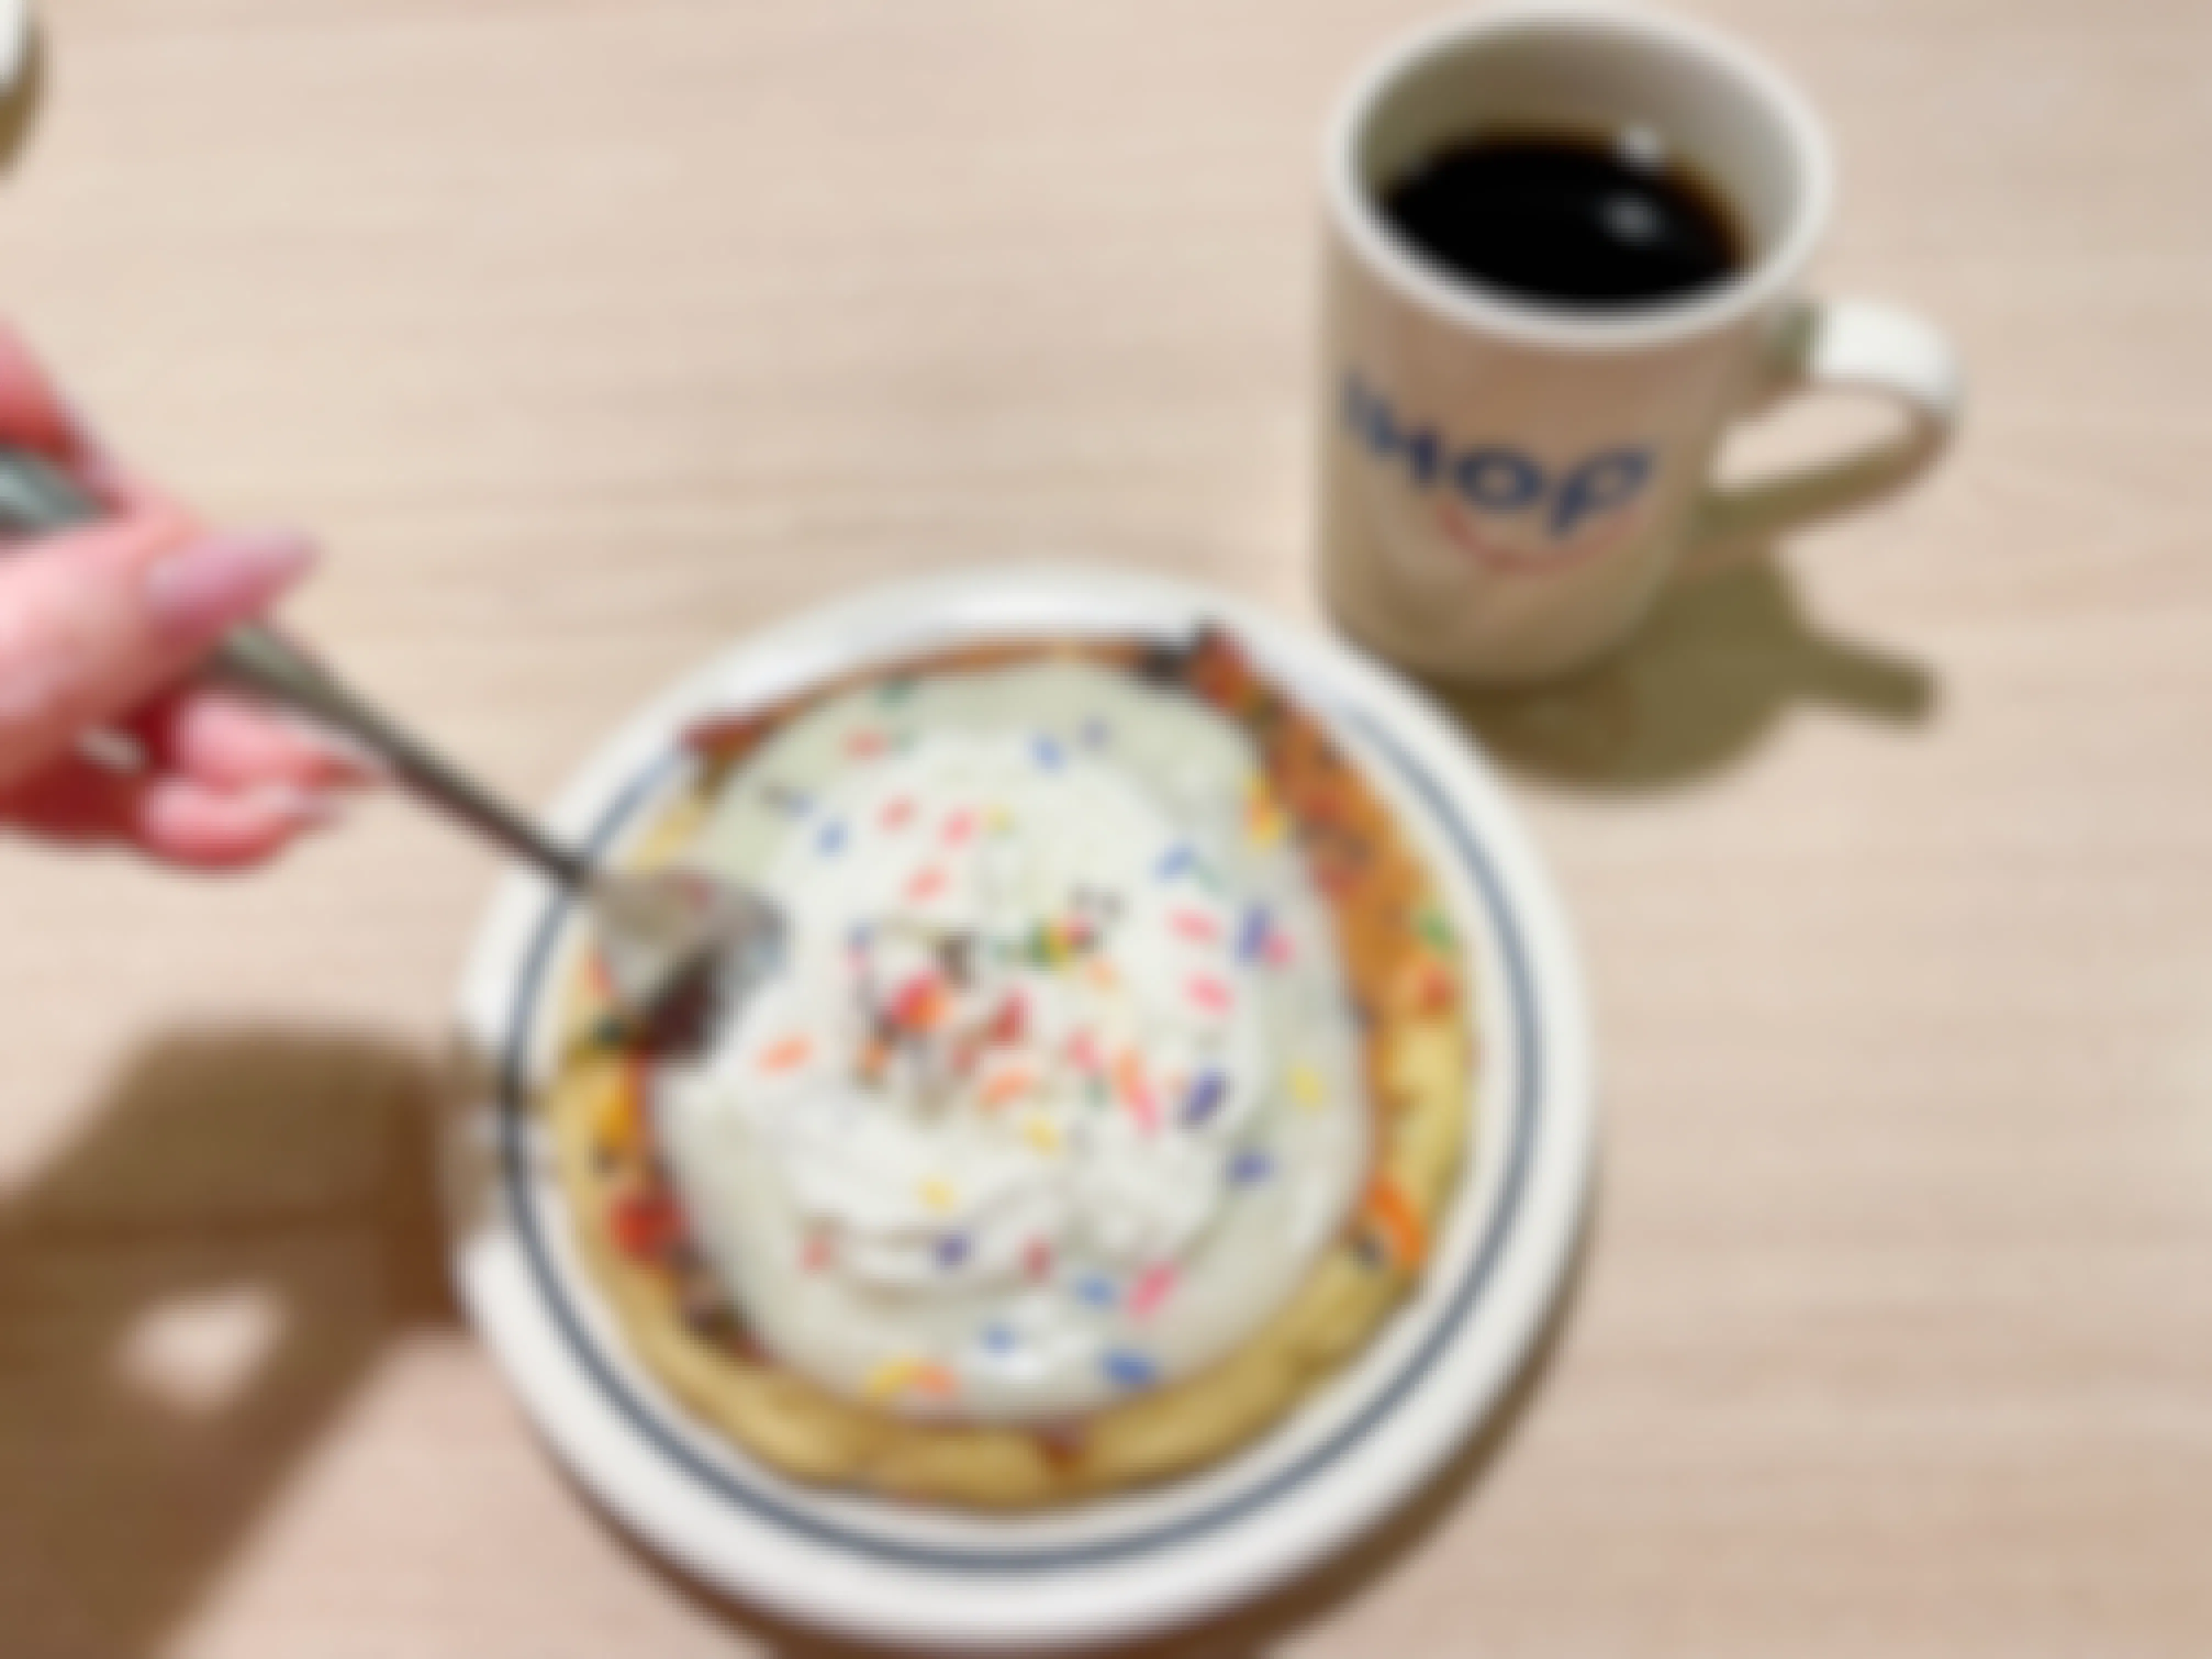 A person's hand sticking a fork into a plate of IHOP Birthday Cake pancakes with sprinkles that is sitting on a table next to a mug of coffee that has he IHOP logo on it.